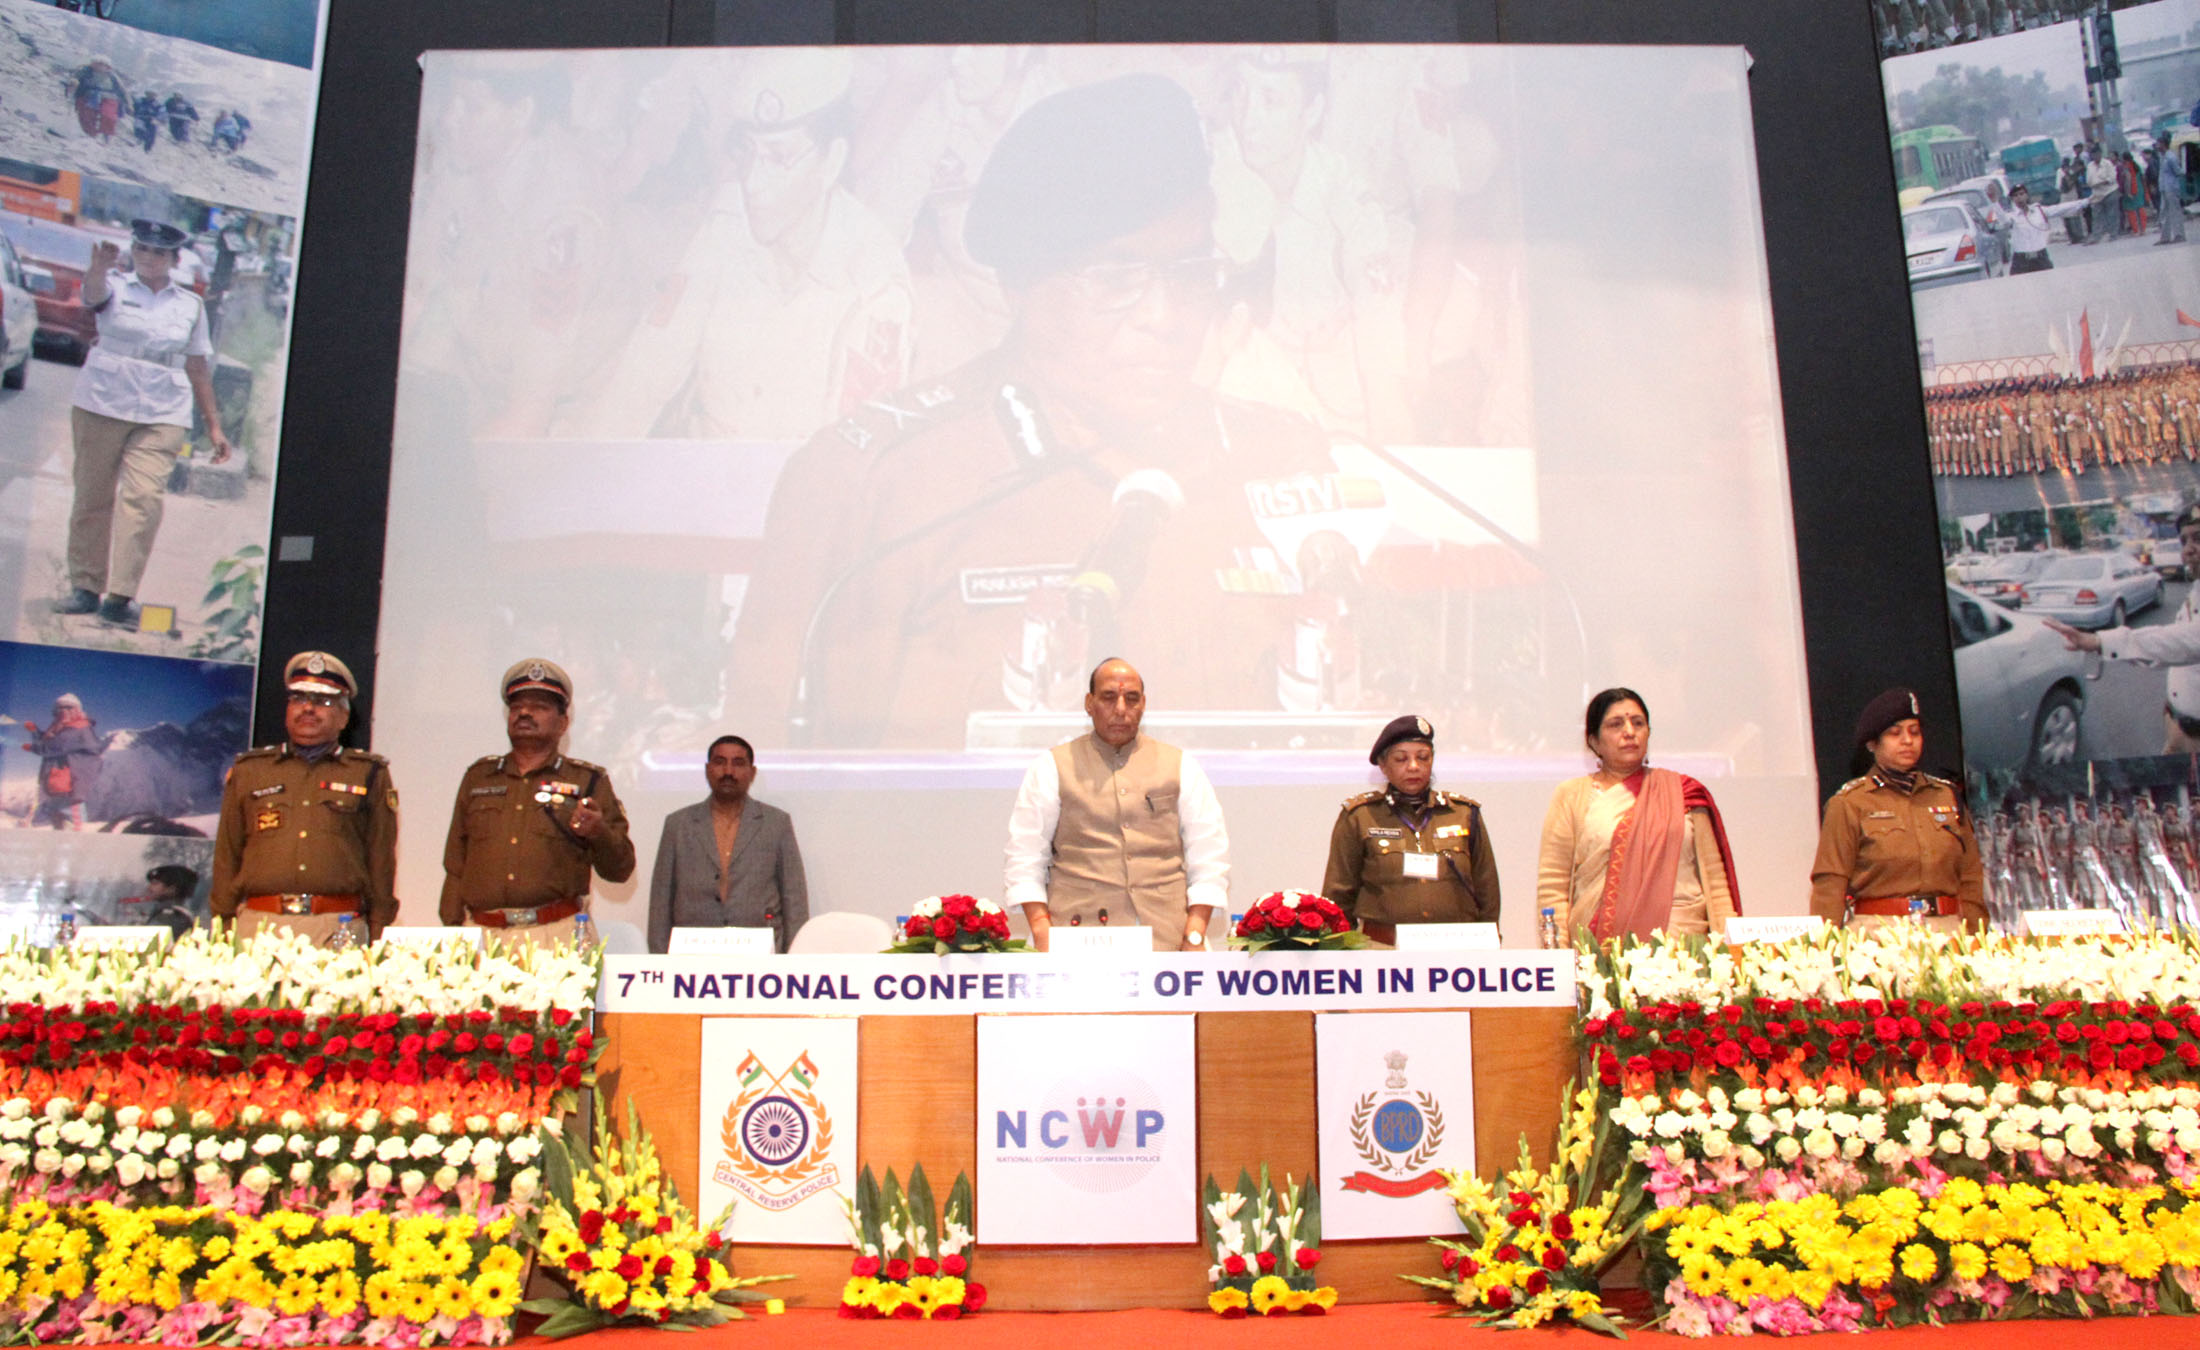 The Union Home Minister, Shri Rajnath Singh and senior officers of Police observing silence for the Martyrs of Police personnel at the 7th National Conference on Women in Police, at CRPF Academy, Kadarpur, Gurgaon on January 06, 2016.